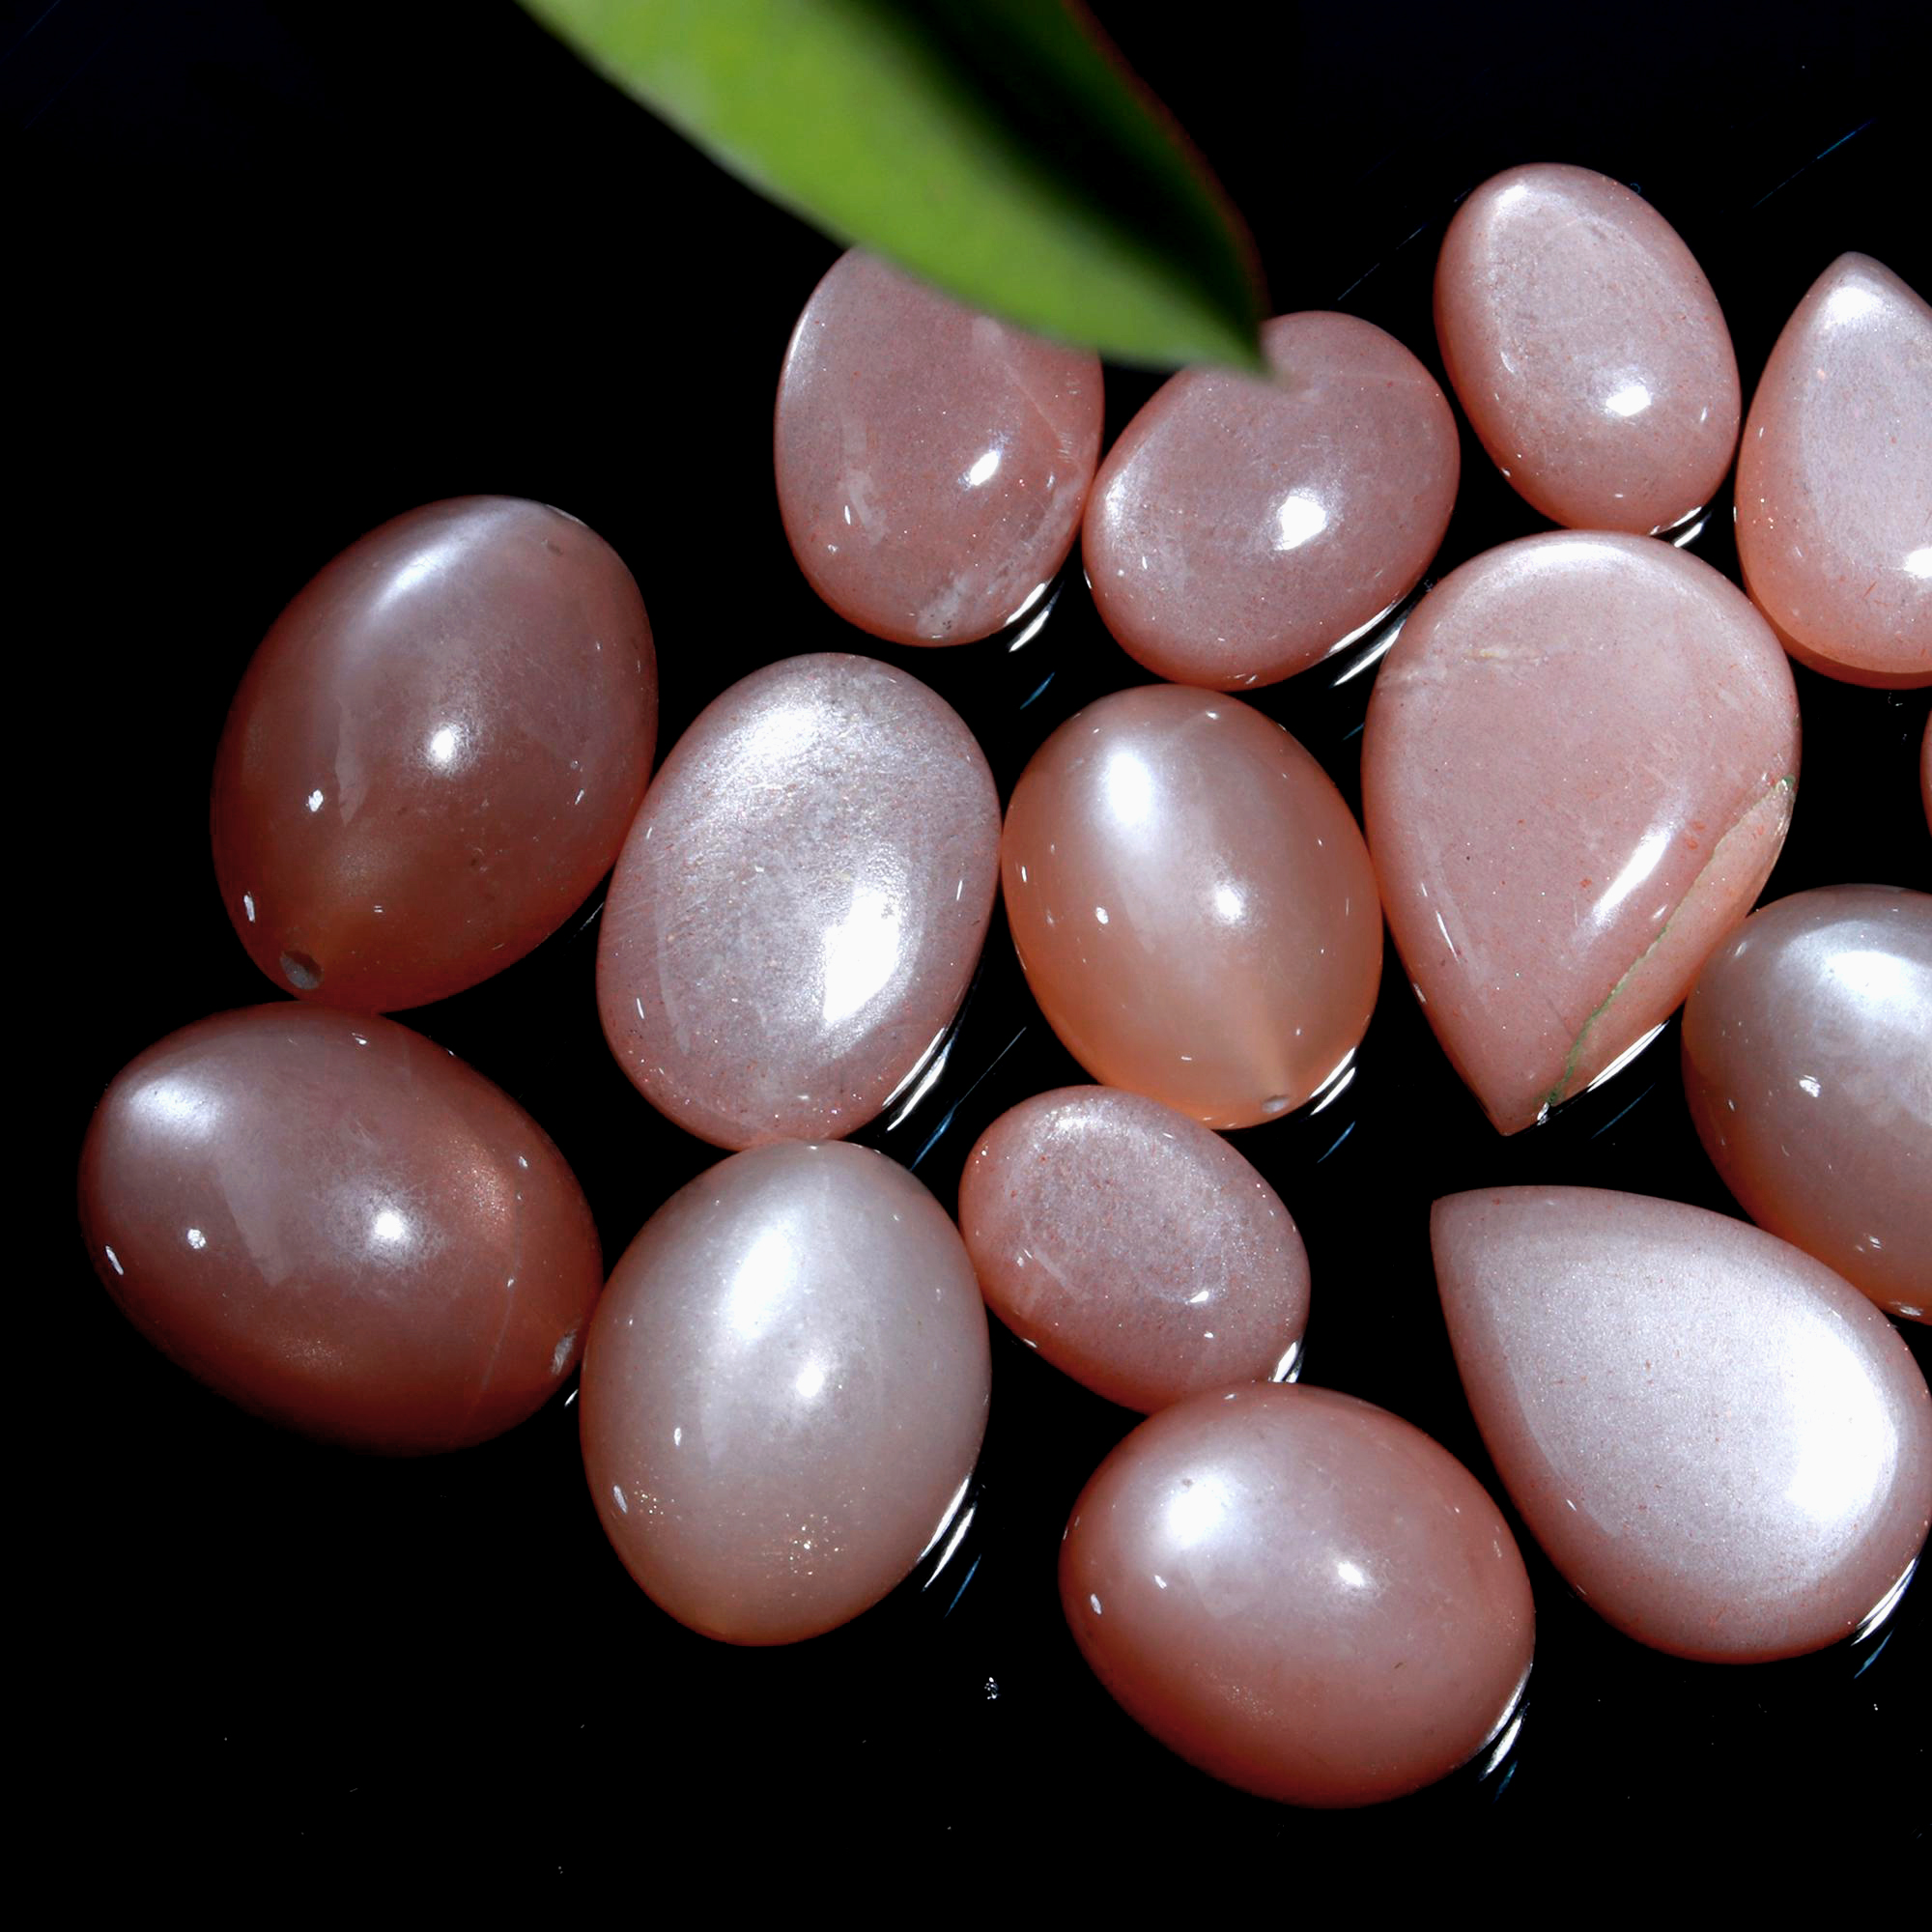 15 Pcs. 94Cts. Natural Peach Rainbow Moonstone polished Mix Cabochon Wholesale Loose Lot Size 18x10 15x9mm Gemstone for jewelry